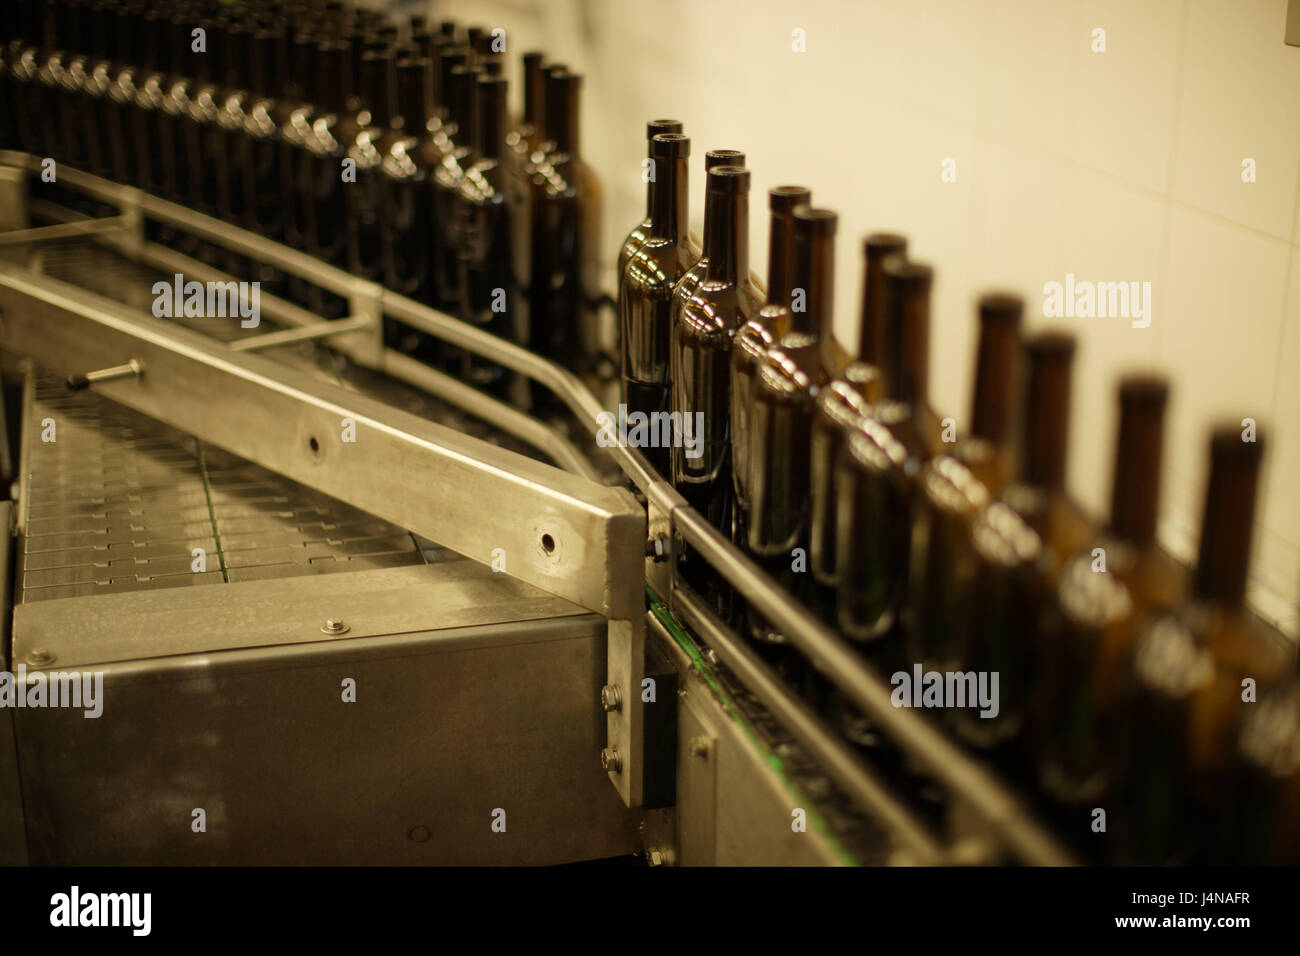 Drink industry, bottling plant, flasks, red wine, wine flasks, wine, drink, inside, alcohol, alcoholic, industry, technology, automatically, automates, economy, series, conveyor belt, Stock Photo